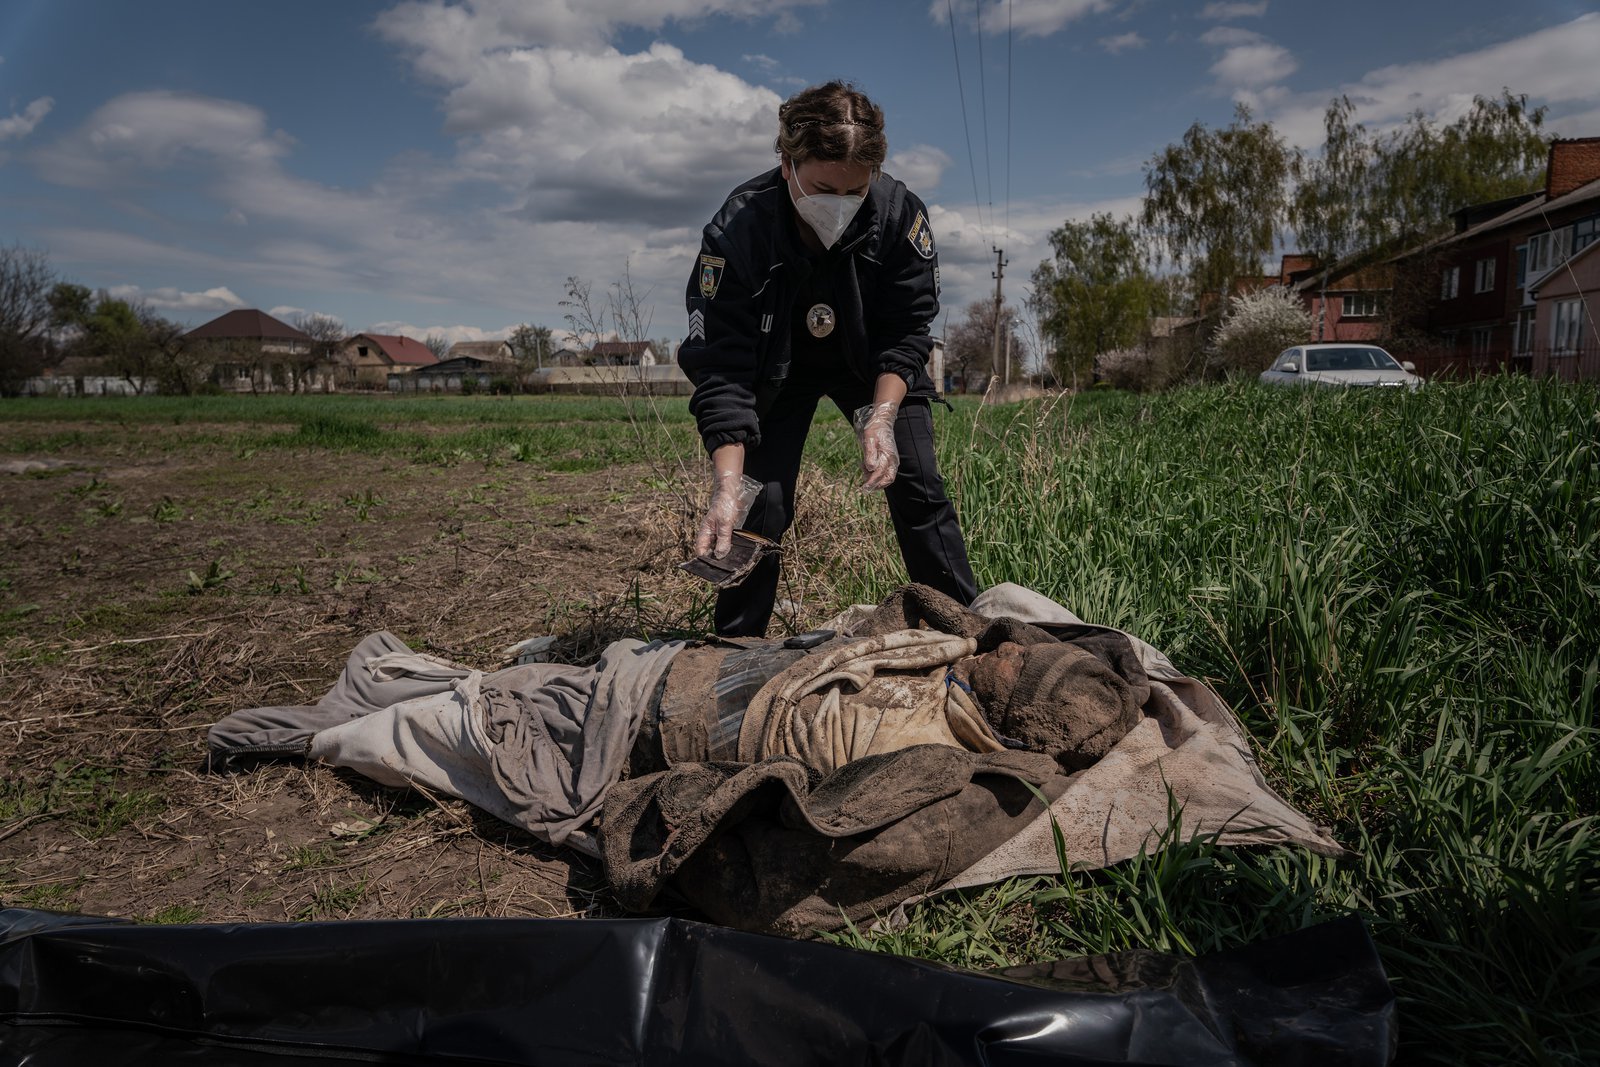 Policewoman Tetyana examines a body. The man is identified by the surname on the bank card